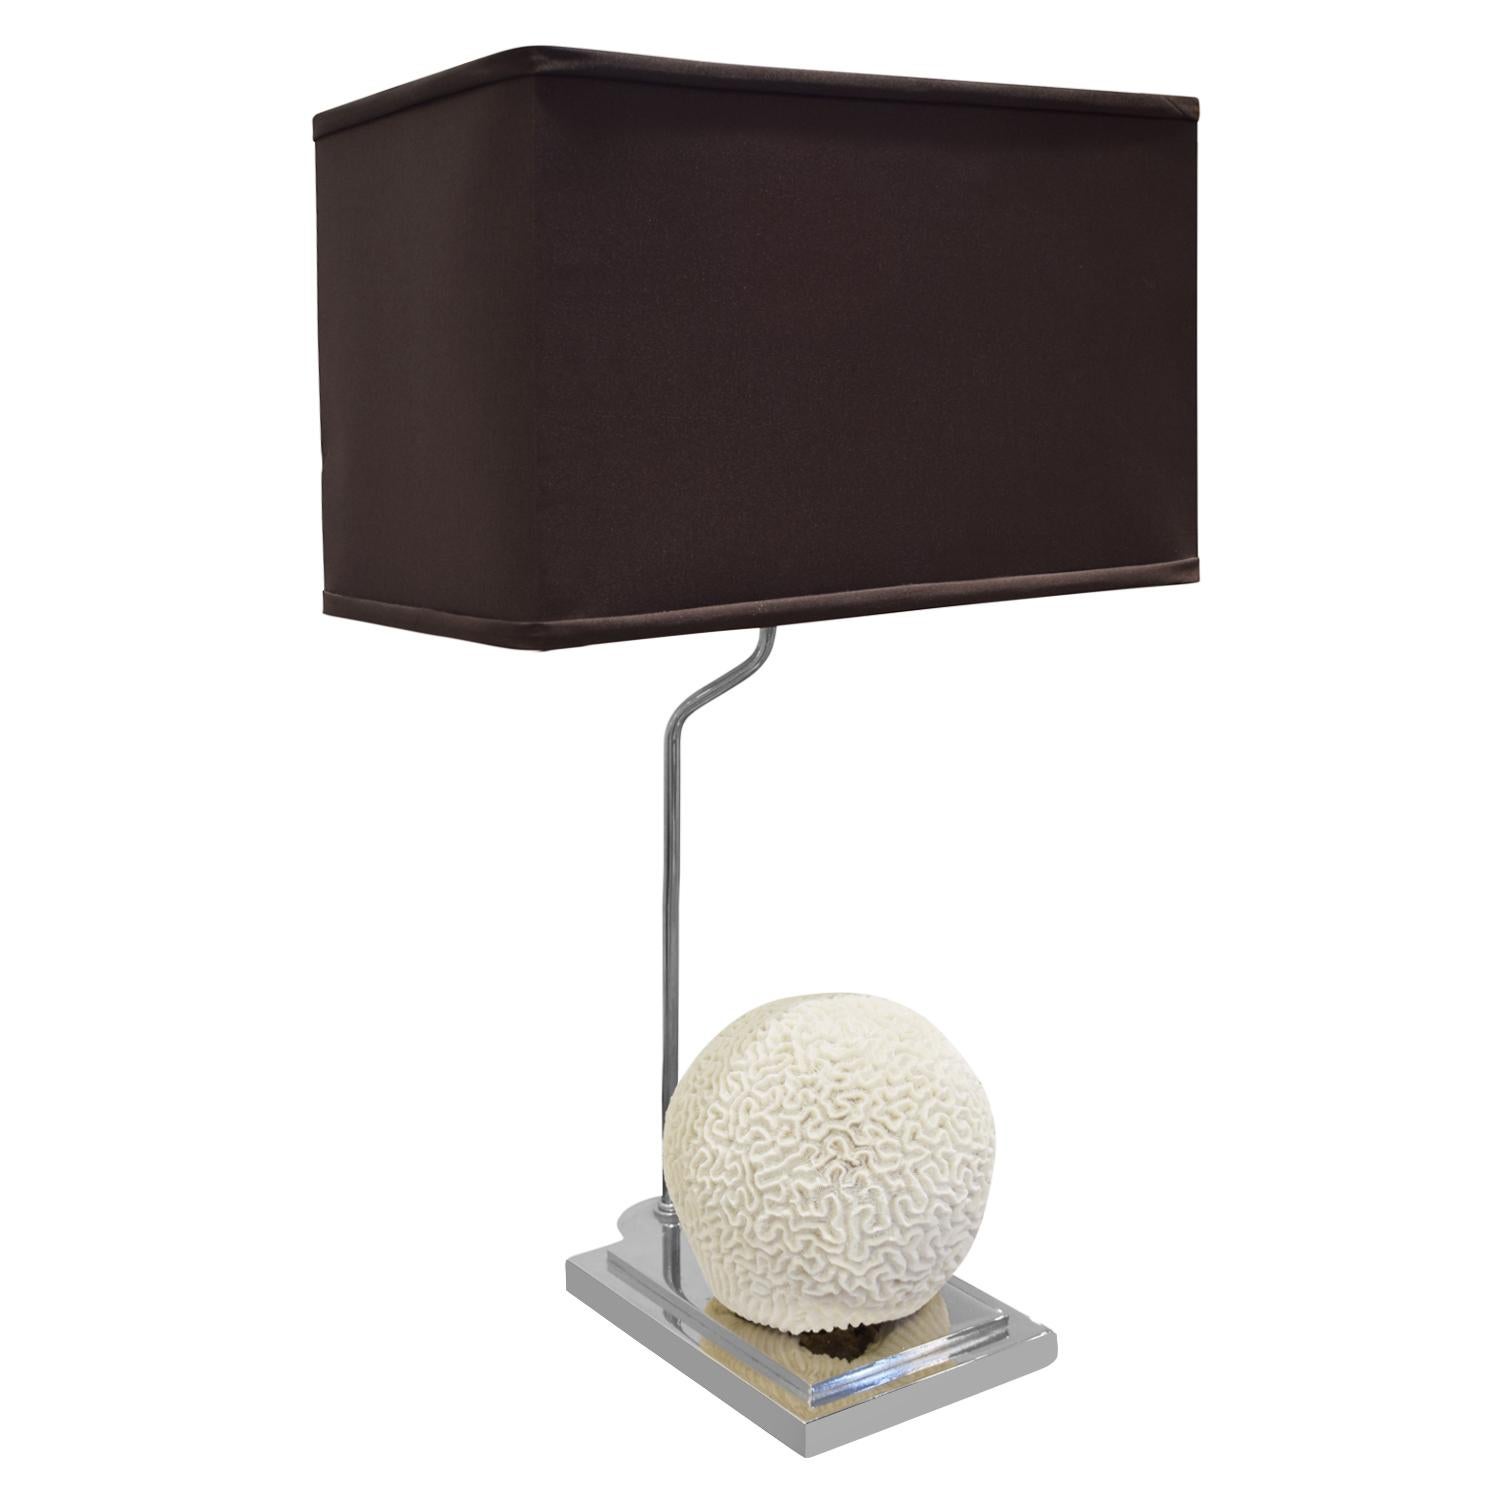 Table lamp in chrome with brain coral formation sitting on platform, American, 1970s. Lamp shade is brown. This lamp is very chic.

Measures: Shade W 16.5 inches
Shade D 9.5 inches.